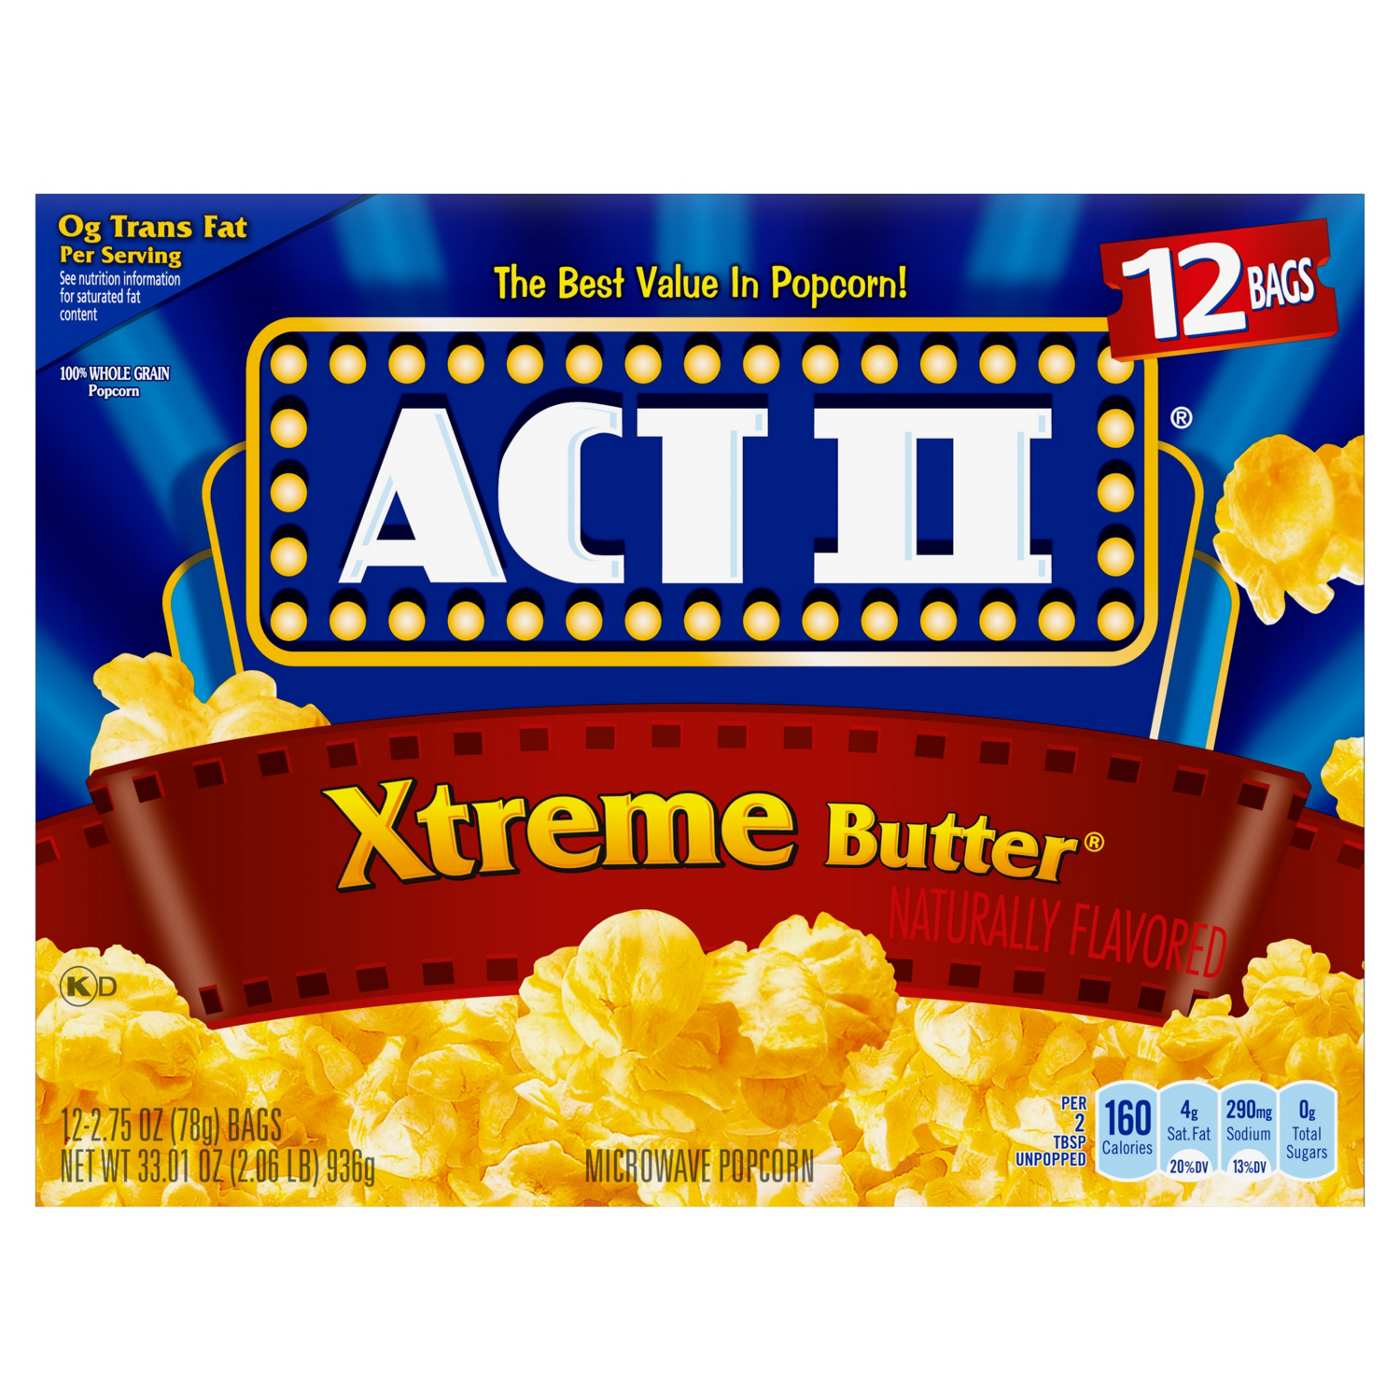 ACT II Xtreme Butter Microwave Popcorn; image 4 of 7